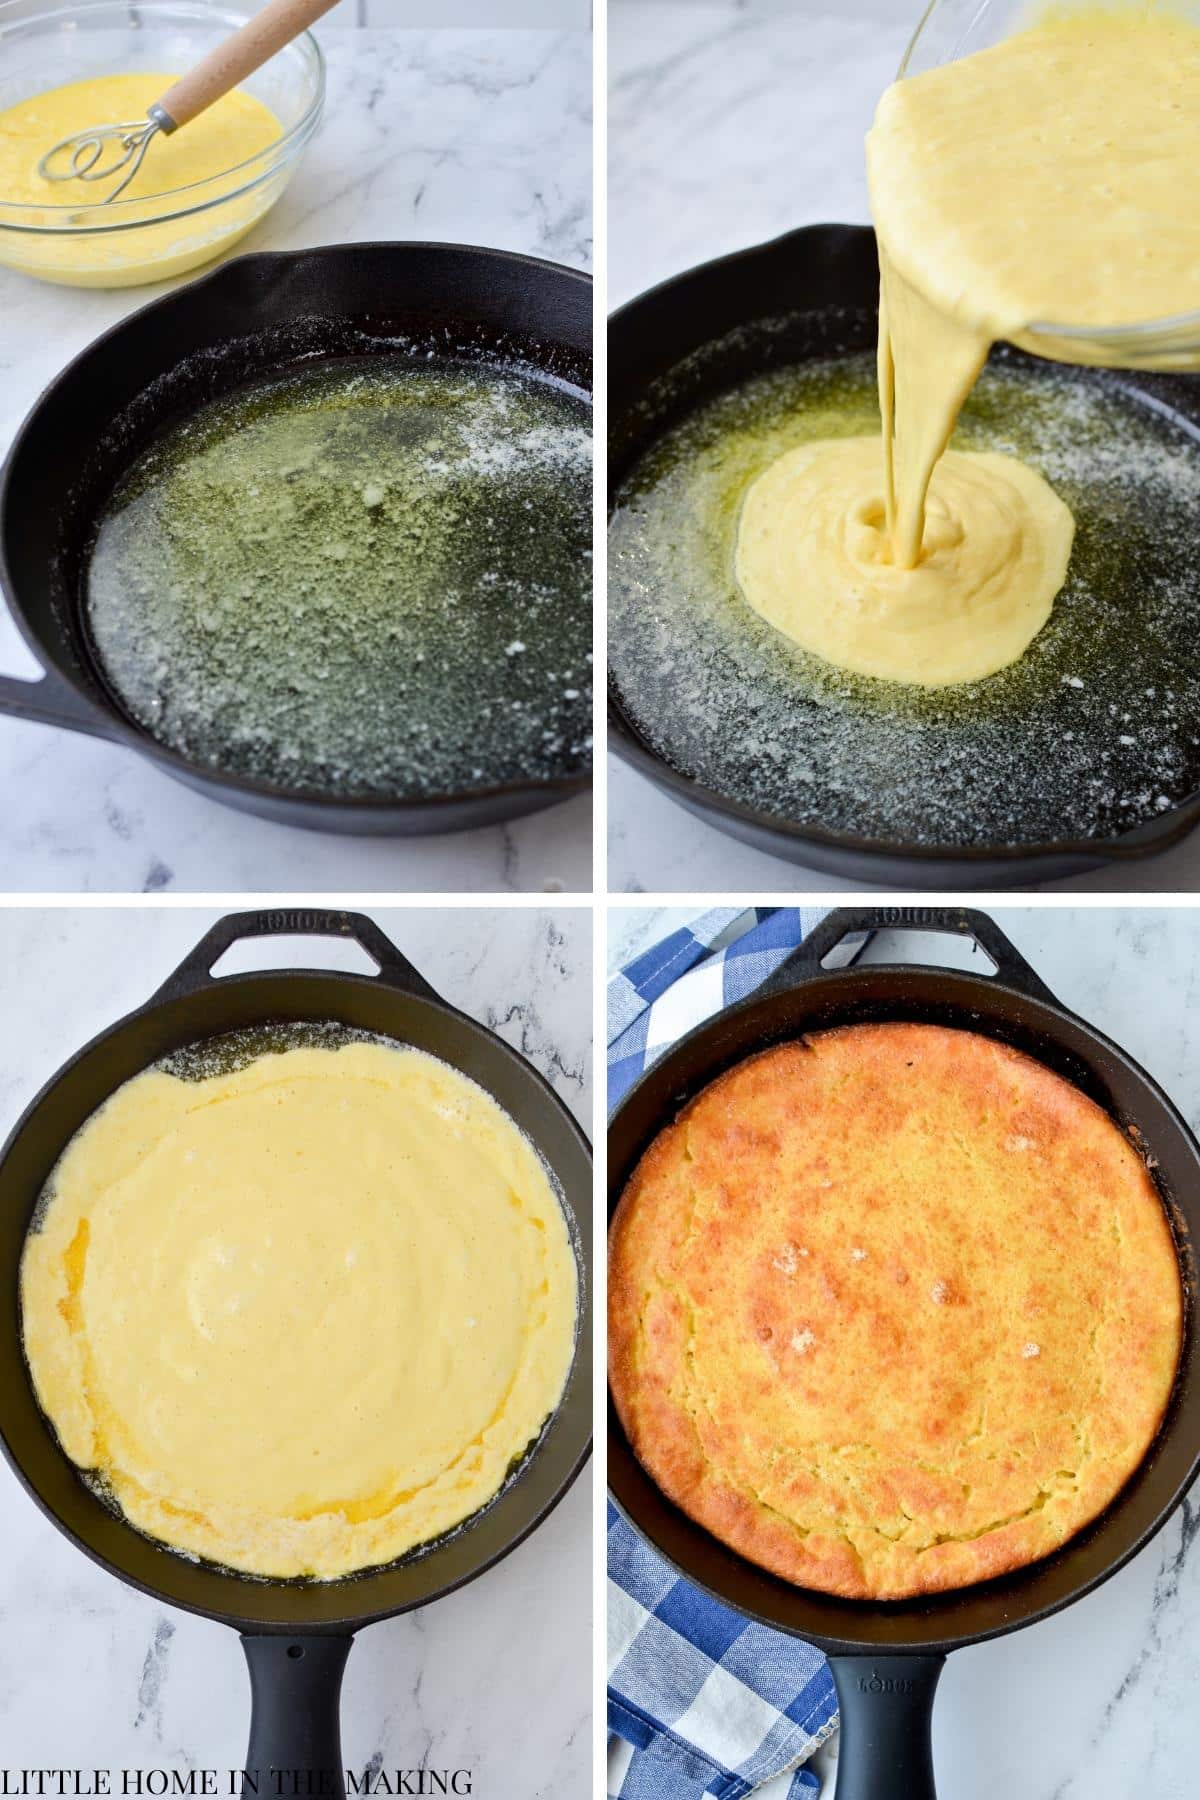 Pouring batter into a cast iron pan with melted butter.